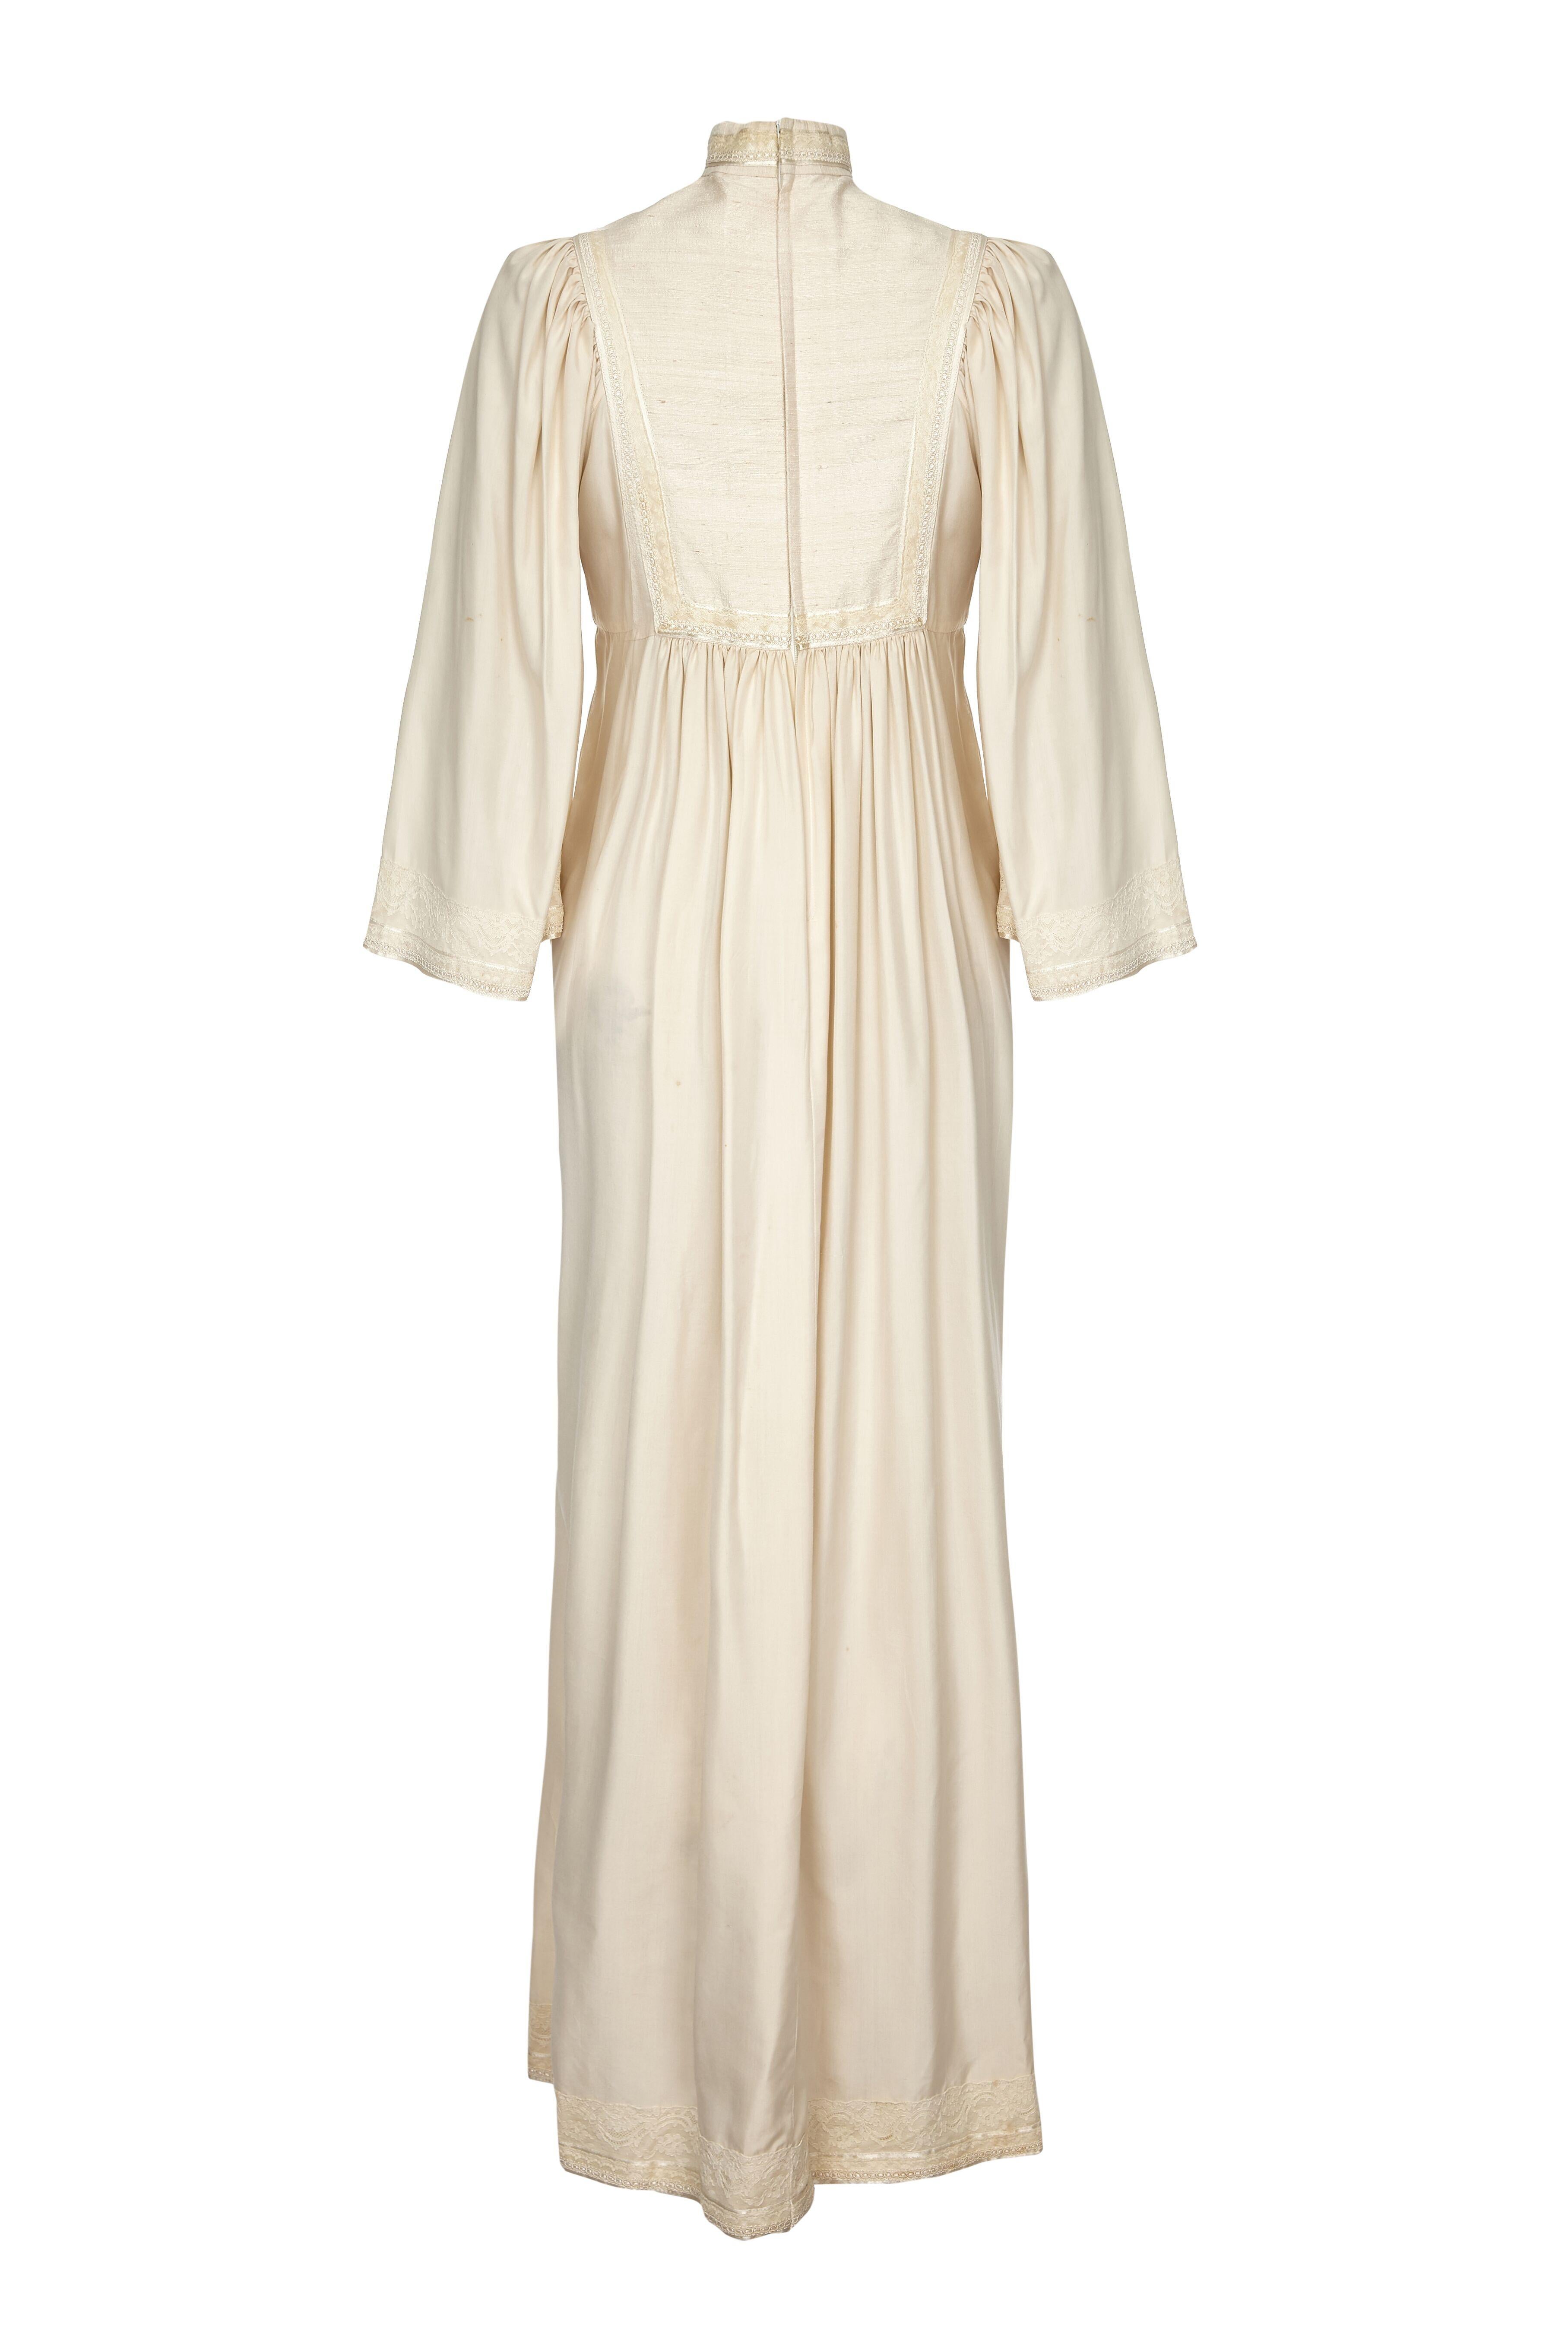 This enchanting 1970s silk smock dress in pale ivory silk from Rumak and Sample has a soft feminine line and presents beautifully as a vintage bridal piece. The embroidered bodice, high collar, bell sleeves and empire waistline create a romantic,